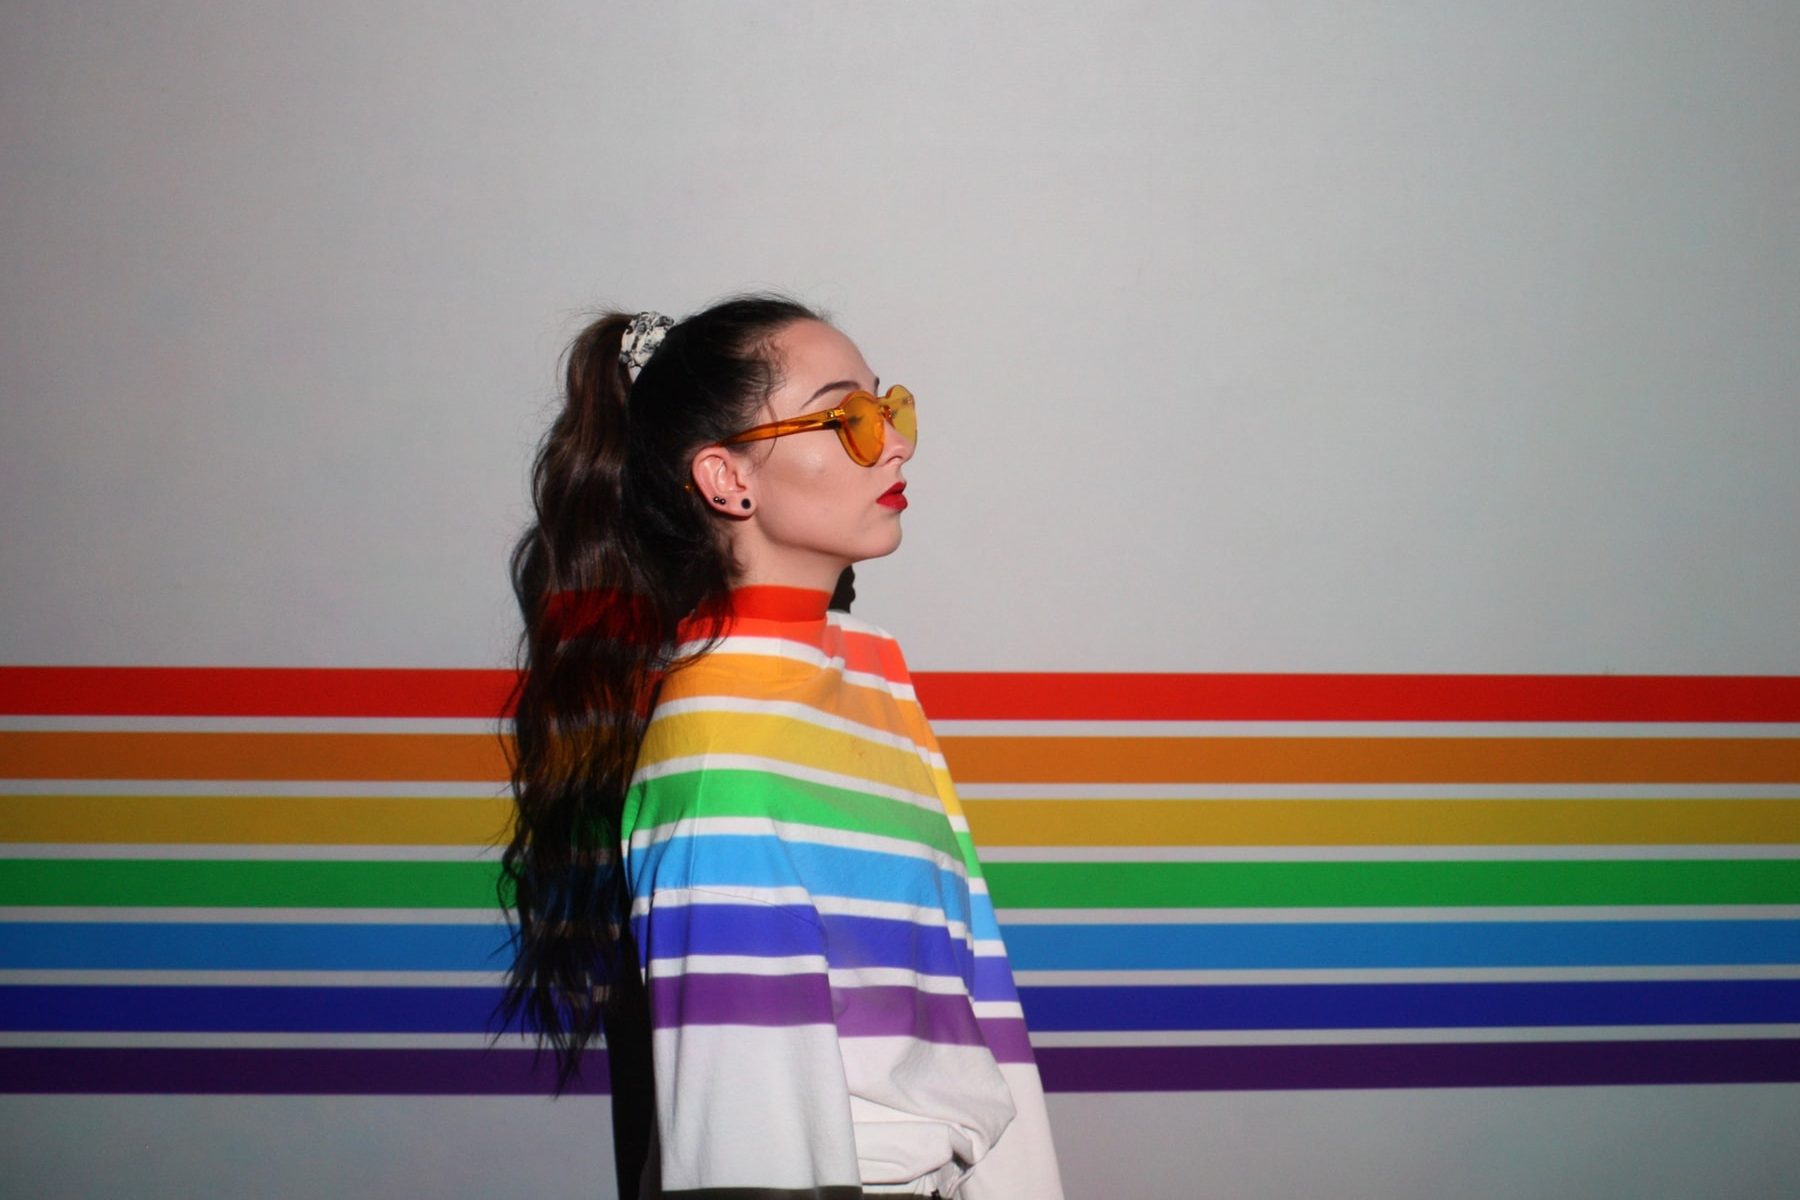 In an article about LGBTQ+ owned brands, a woman in a white shirt with rainbow stripes